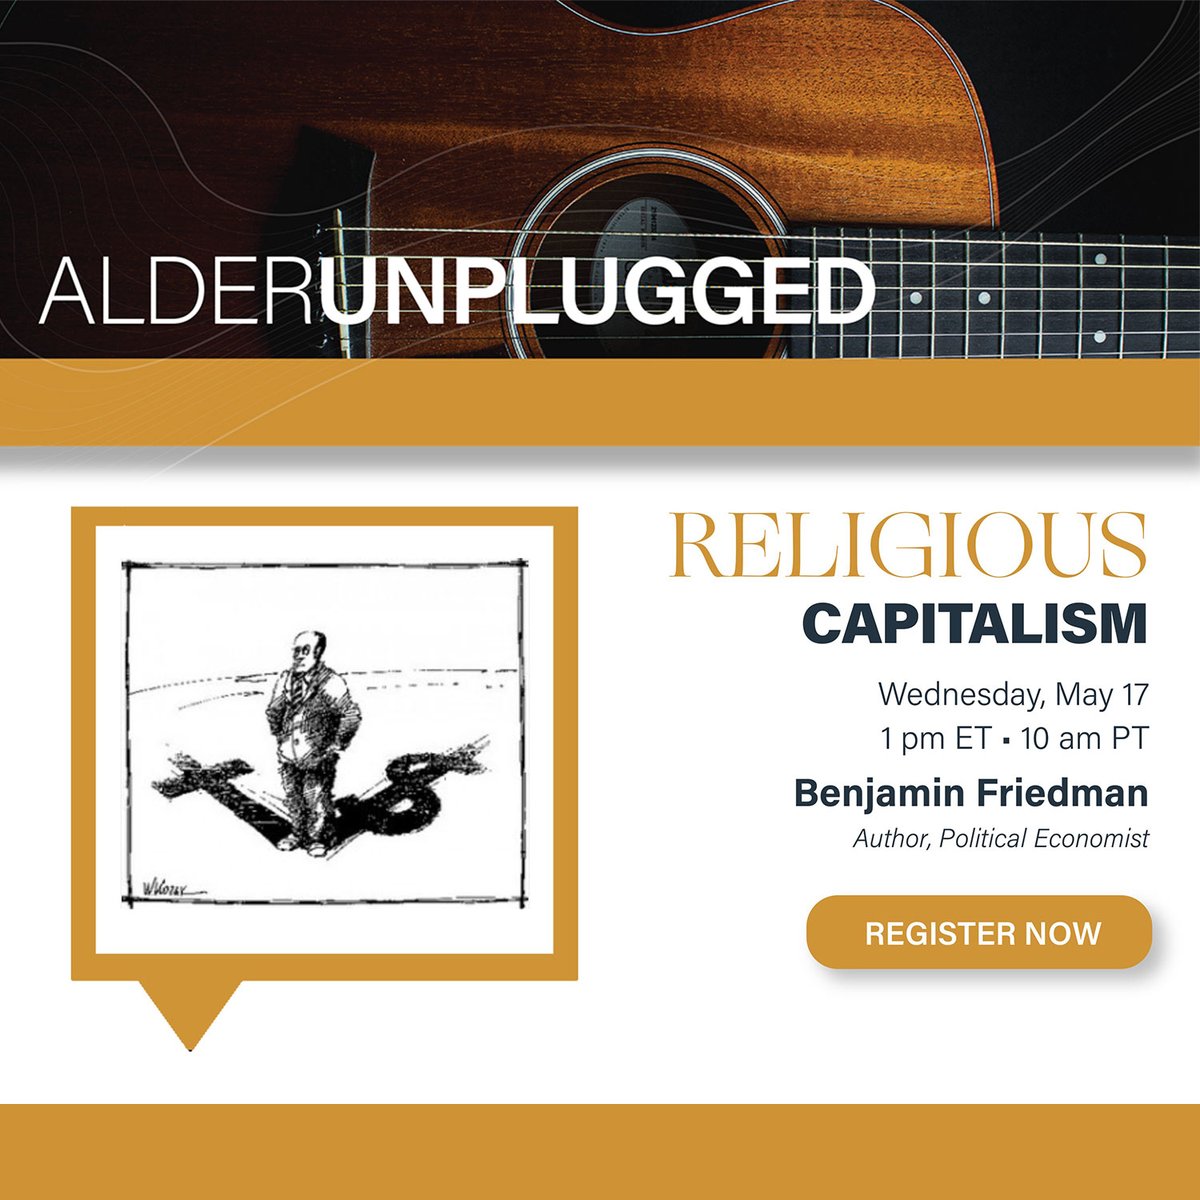 ALDER UNPLUGGED with Benjamin Friedman on Wednesday, May 17th (10am PT / 1pm ET) - Members only event - register at alder.co/experiences/ev….